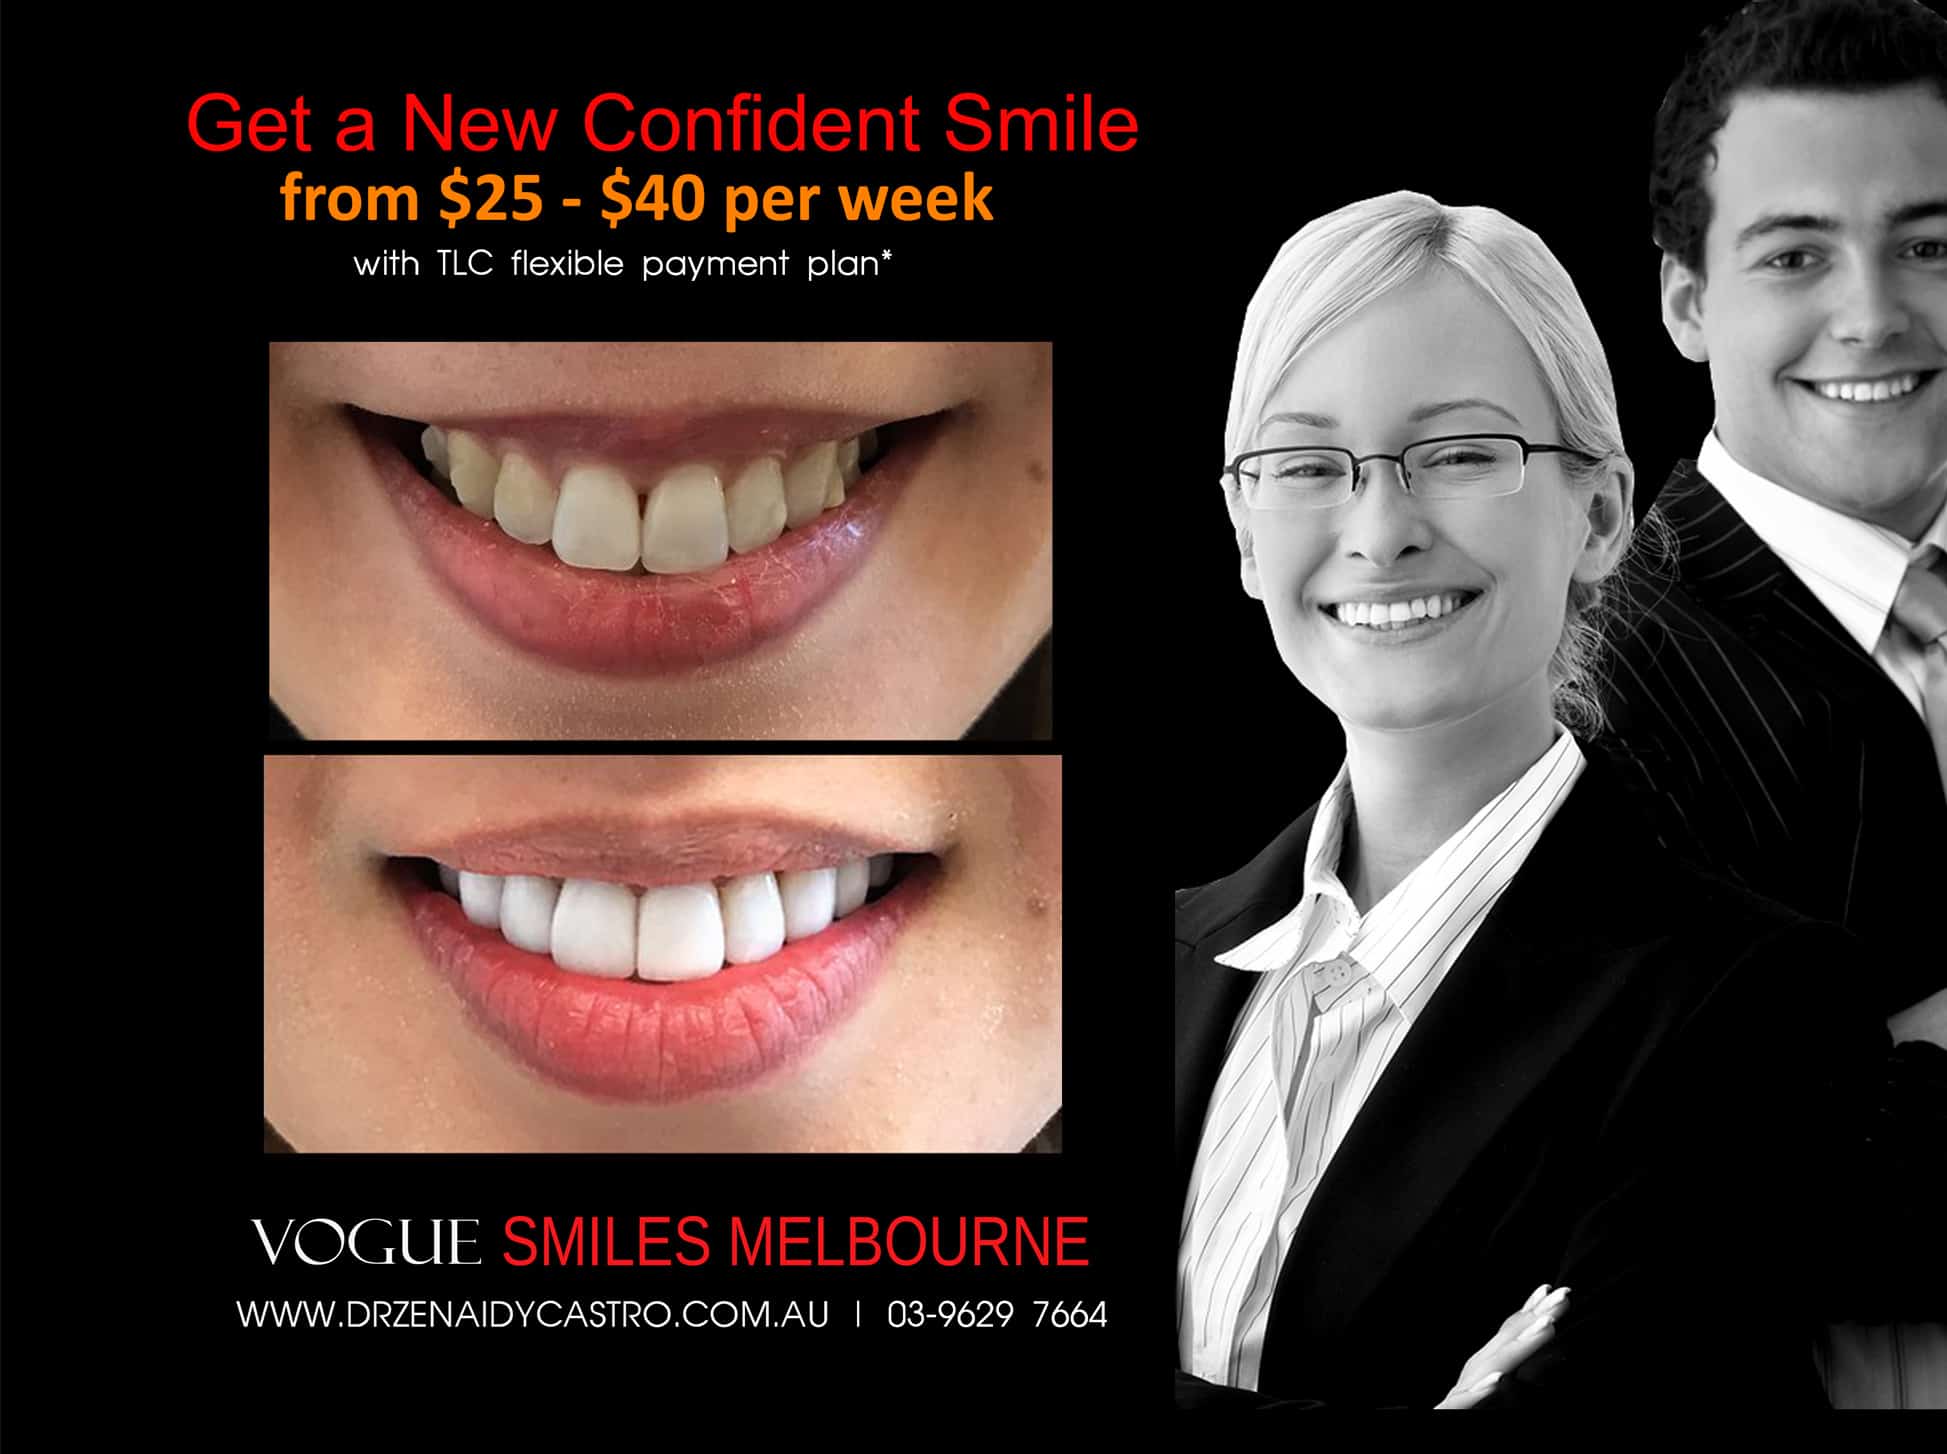 At-home Teeth Whitening Kits or Take-Home Whitening Melbourne CBD -affordable teeth whitening in Melbourne